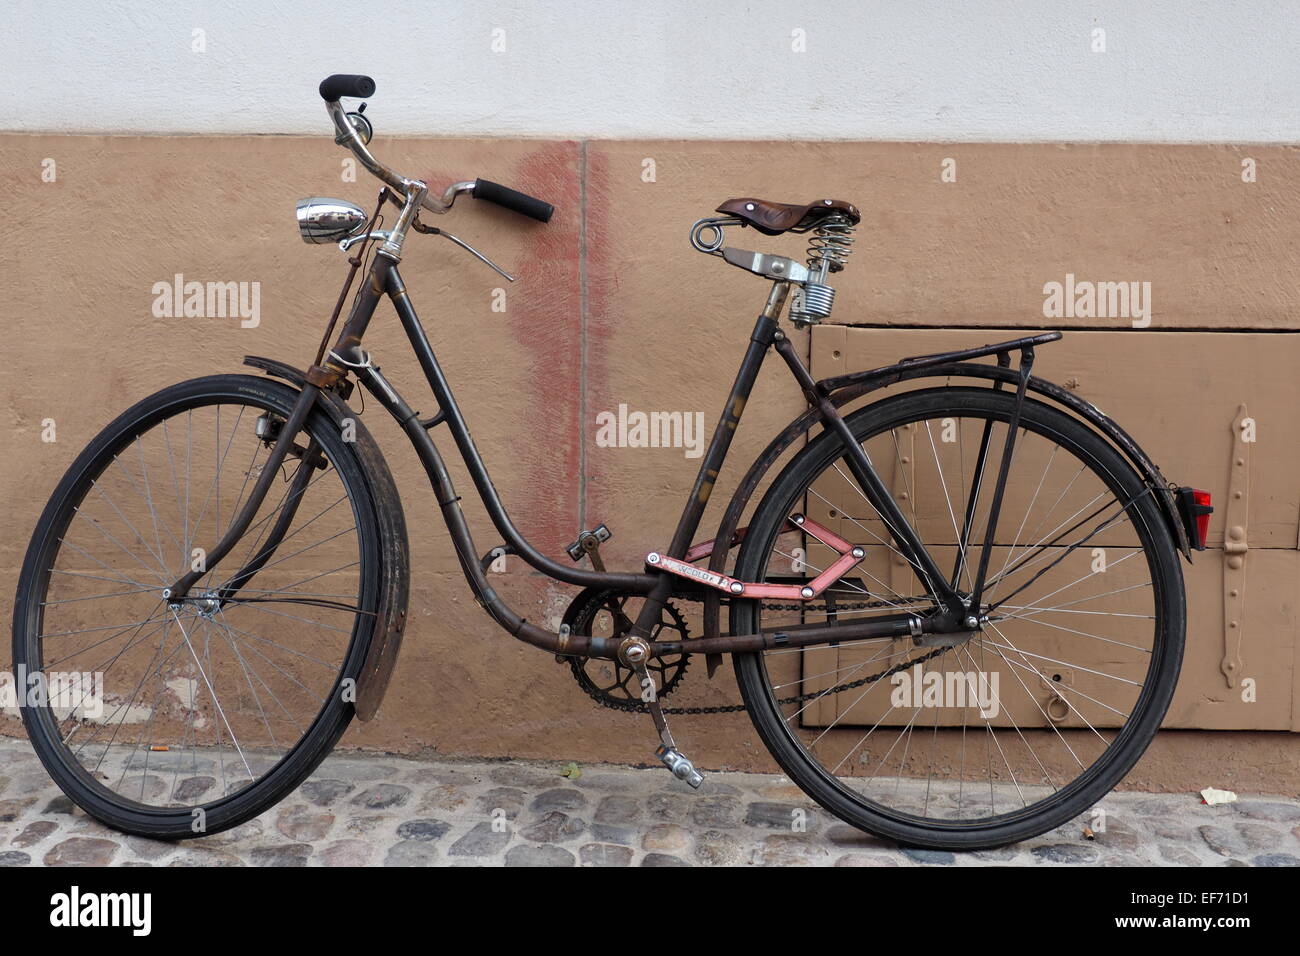 Vintage bike leaning against a wall. Stock Photo